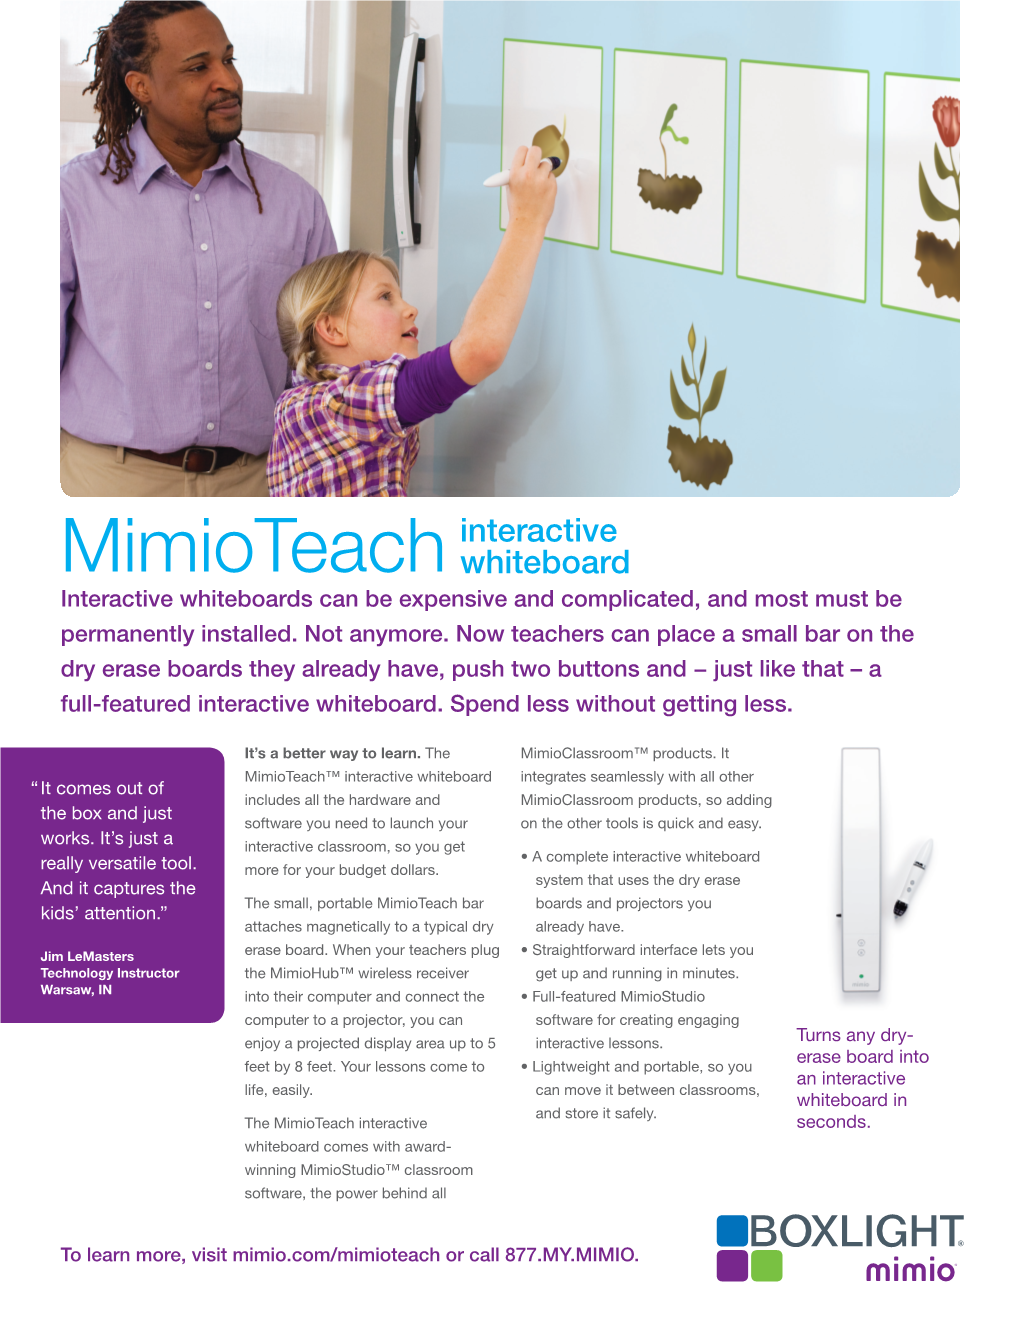 Mimioteach Whiteboard Interactive Whiteboards Can Be Expensive and Complicated, and Most Must Be Permanently Installed